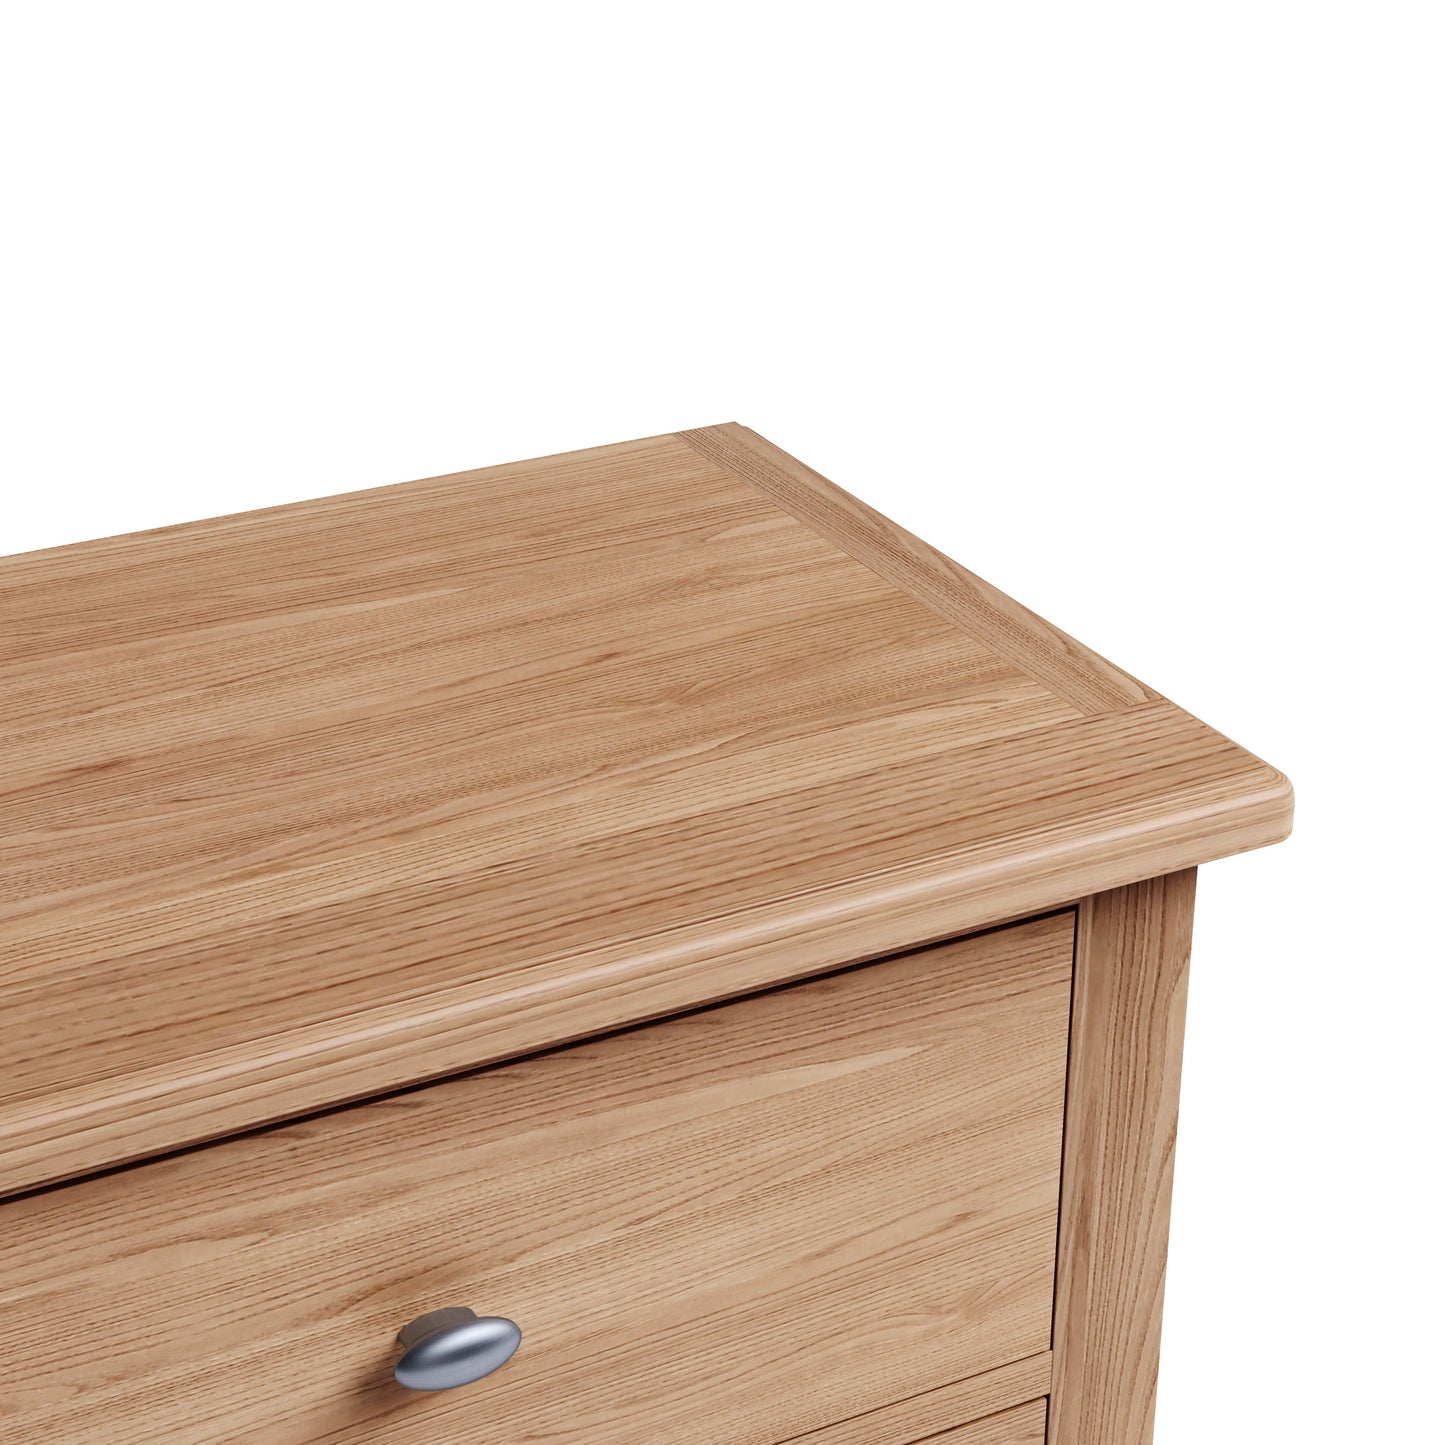 Guildford 6 Drawer Chest